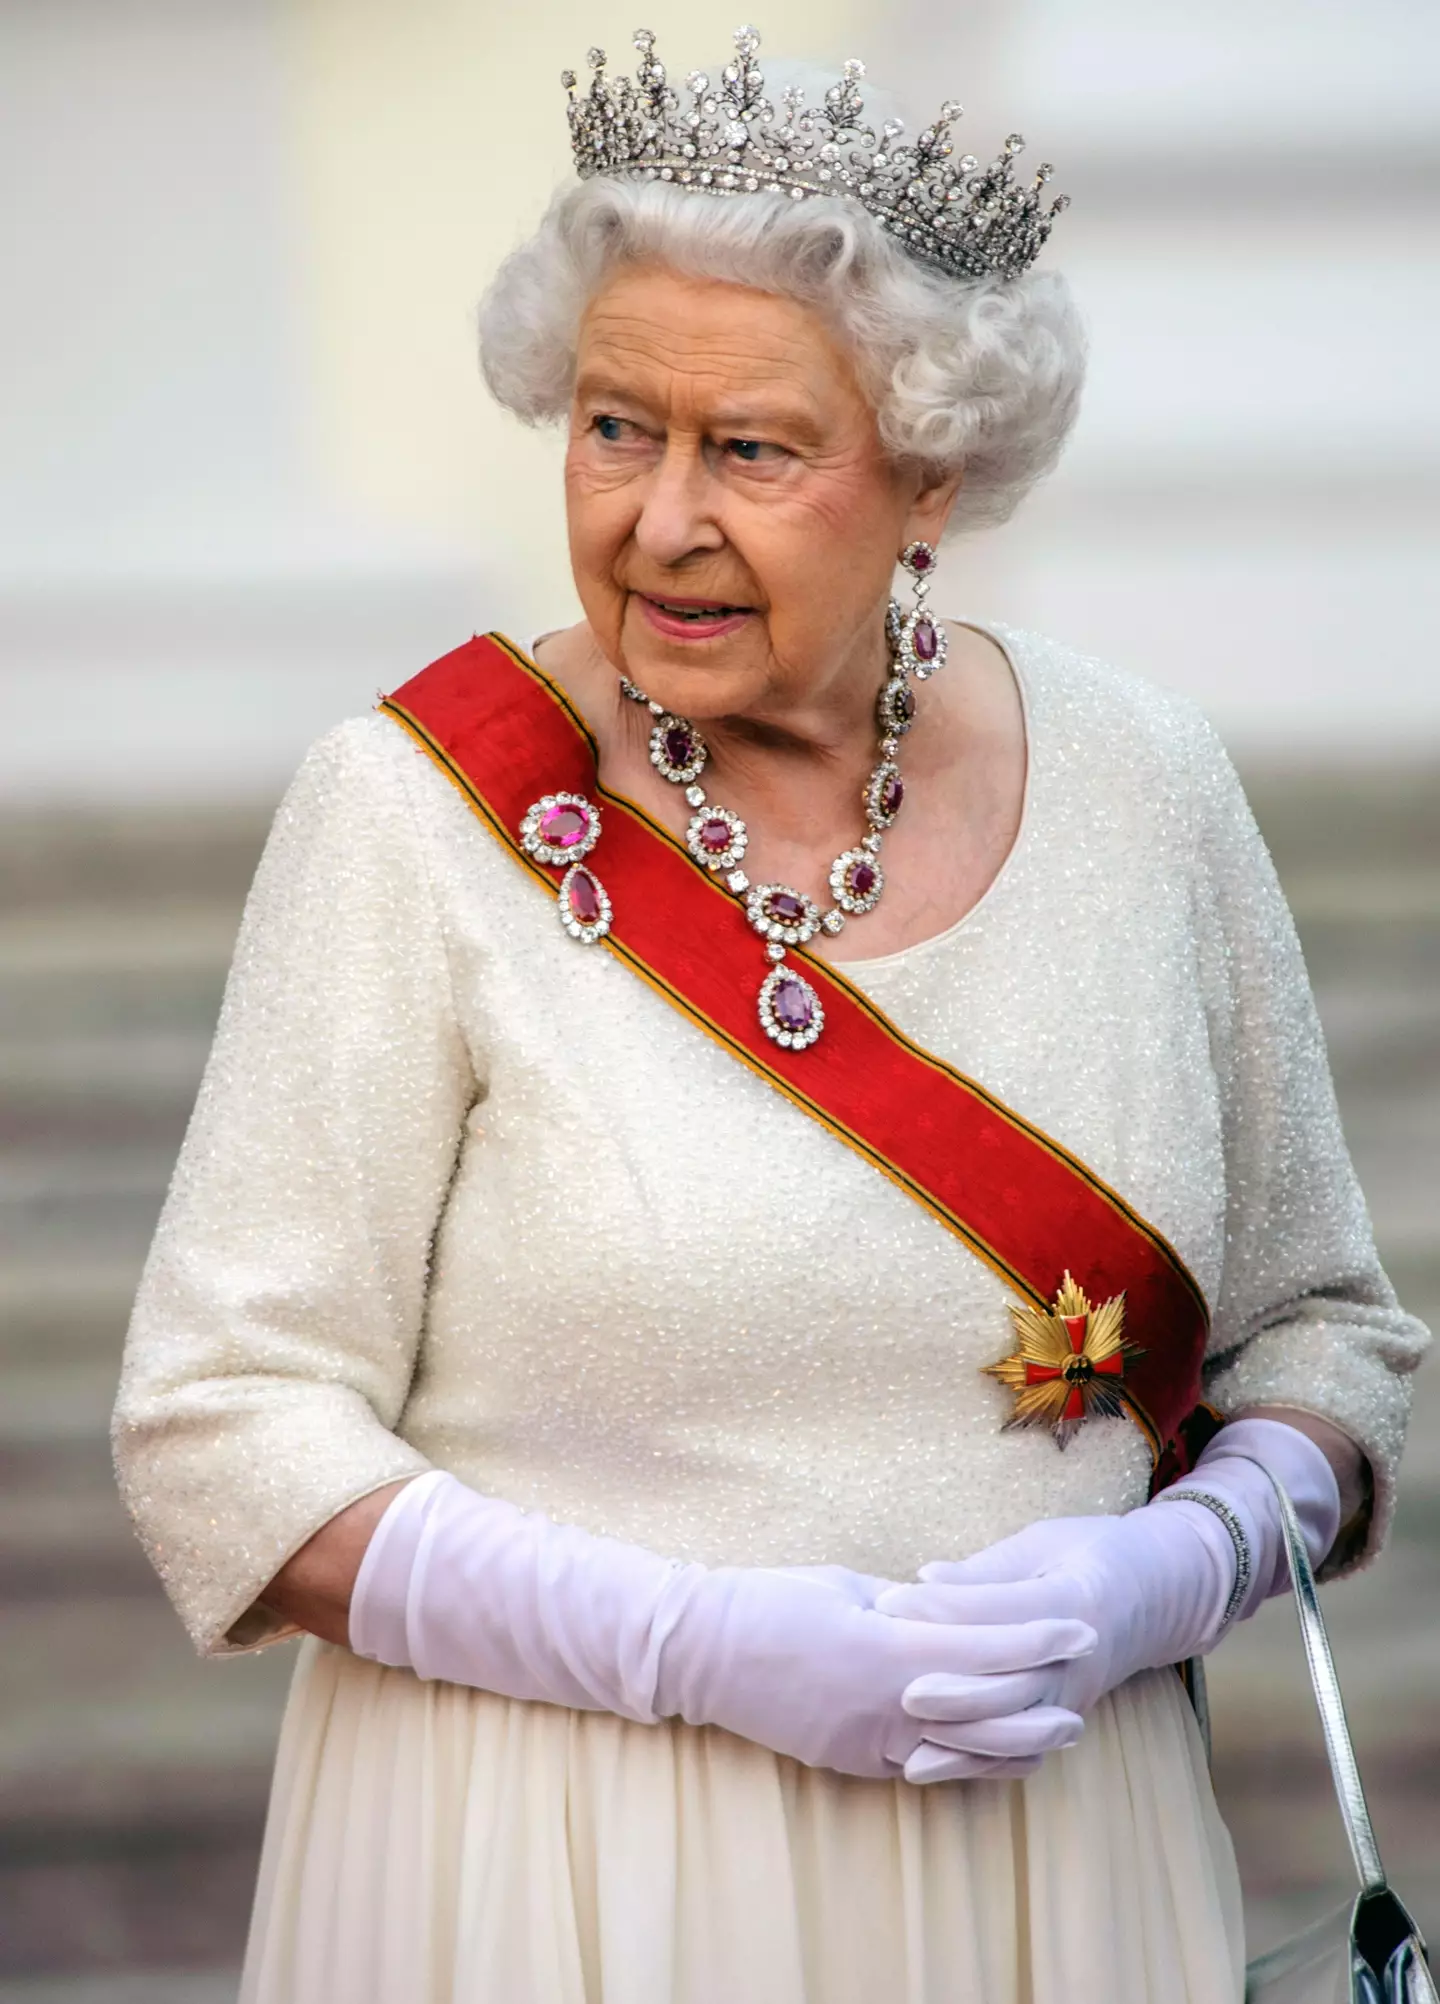 The Queen was being transported to Windsor after her funeral on Monday 19 September.